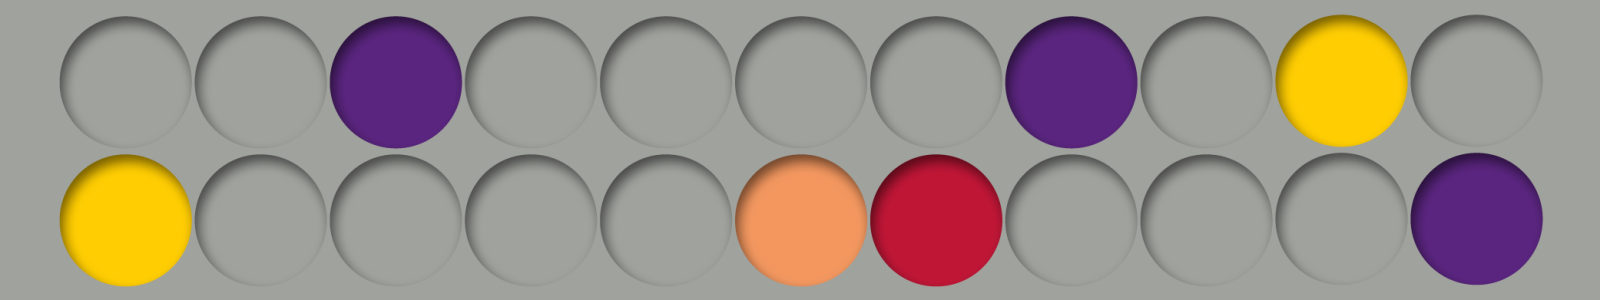 grey banner with grey, yellow, purple, orange and red circles